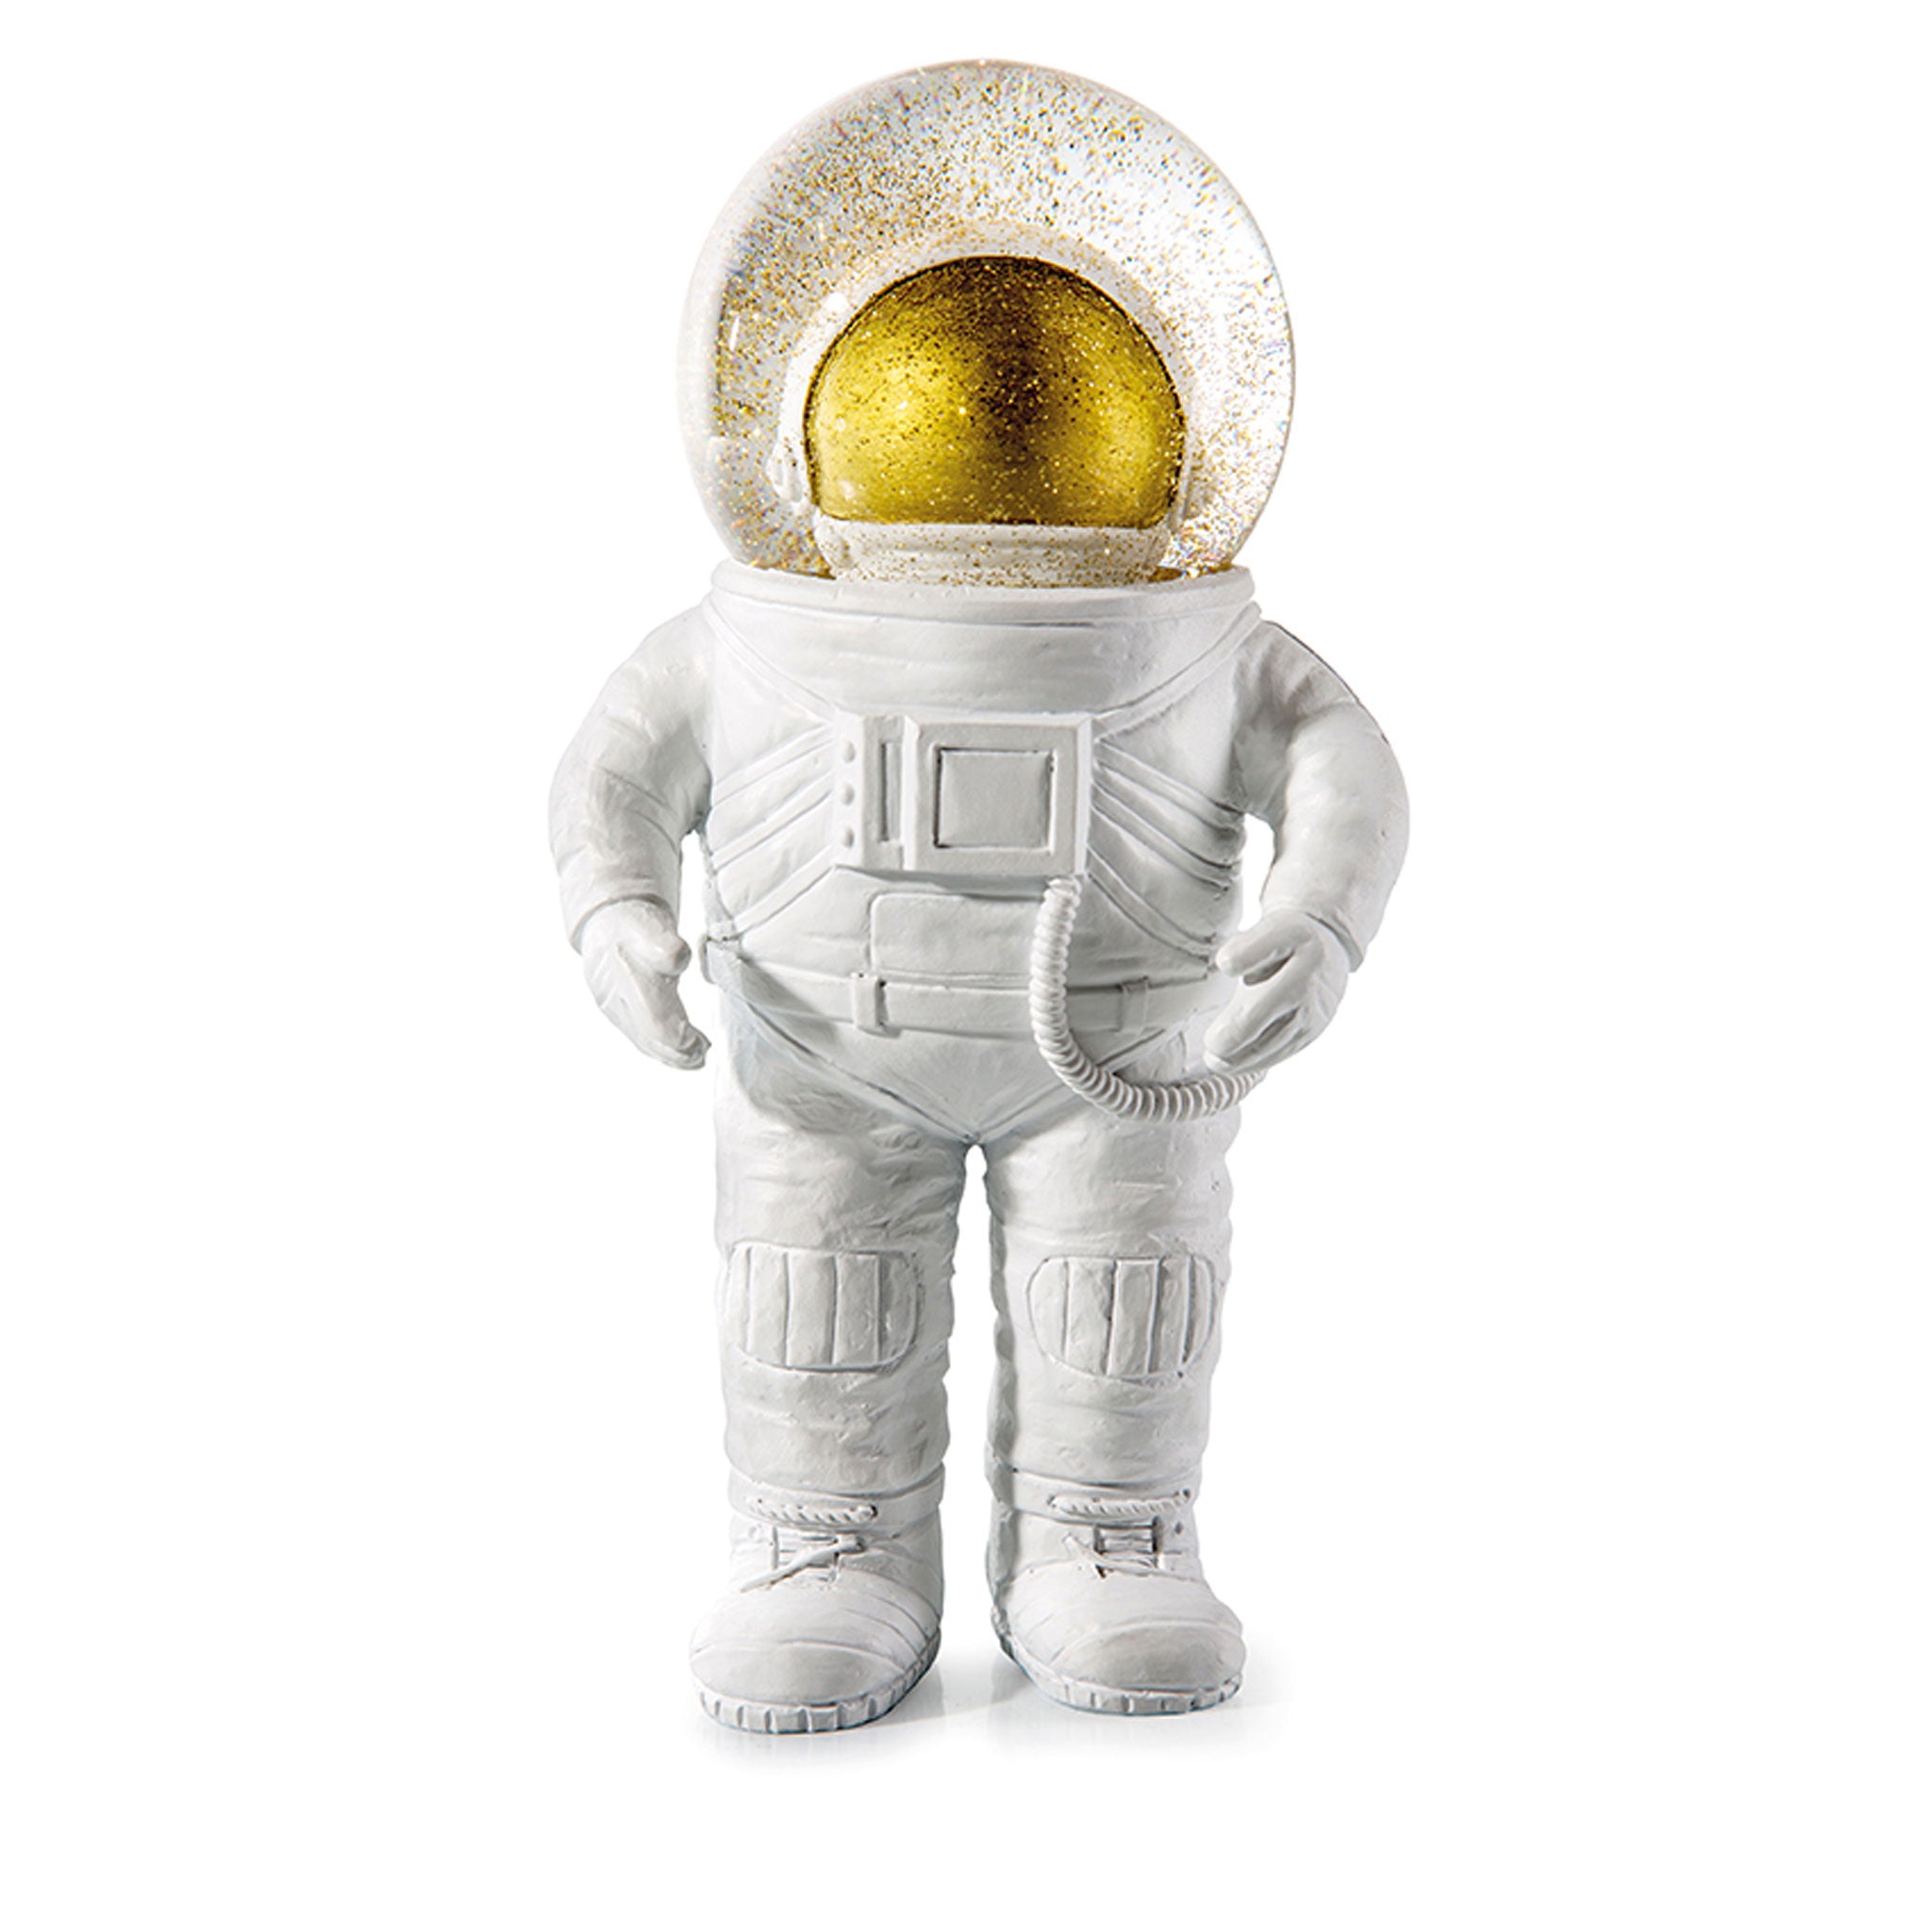 SUMMERGLOBE THE GIANT ASTRONAUT | Large ASTRONAUT with GLITTER BALL | Donkey Products